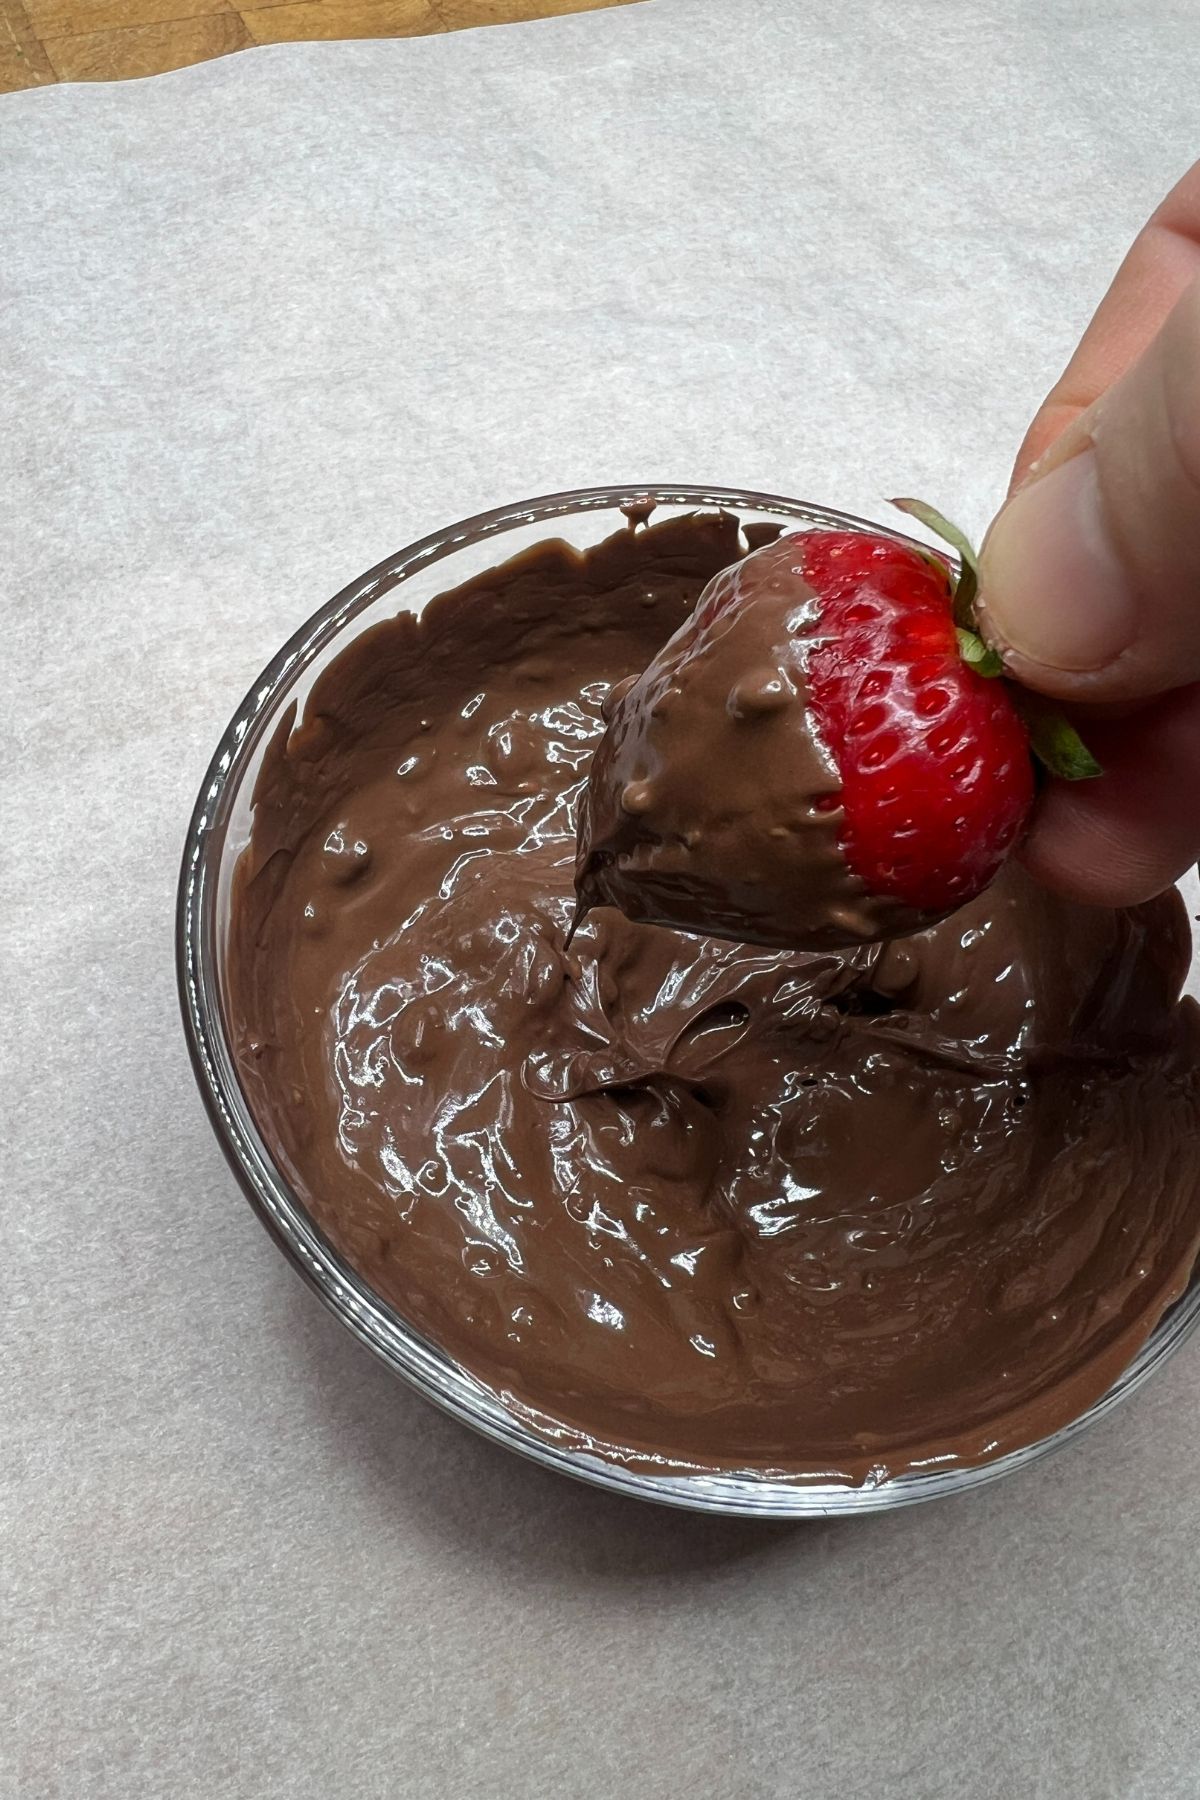 Dipping a strawberry into chocolate and nutella.